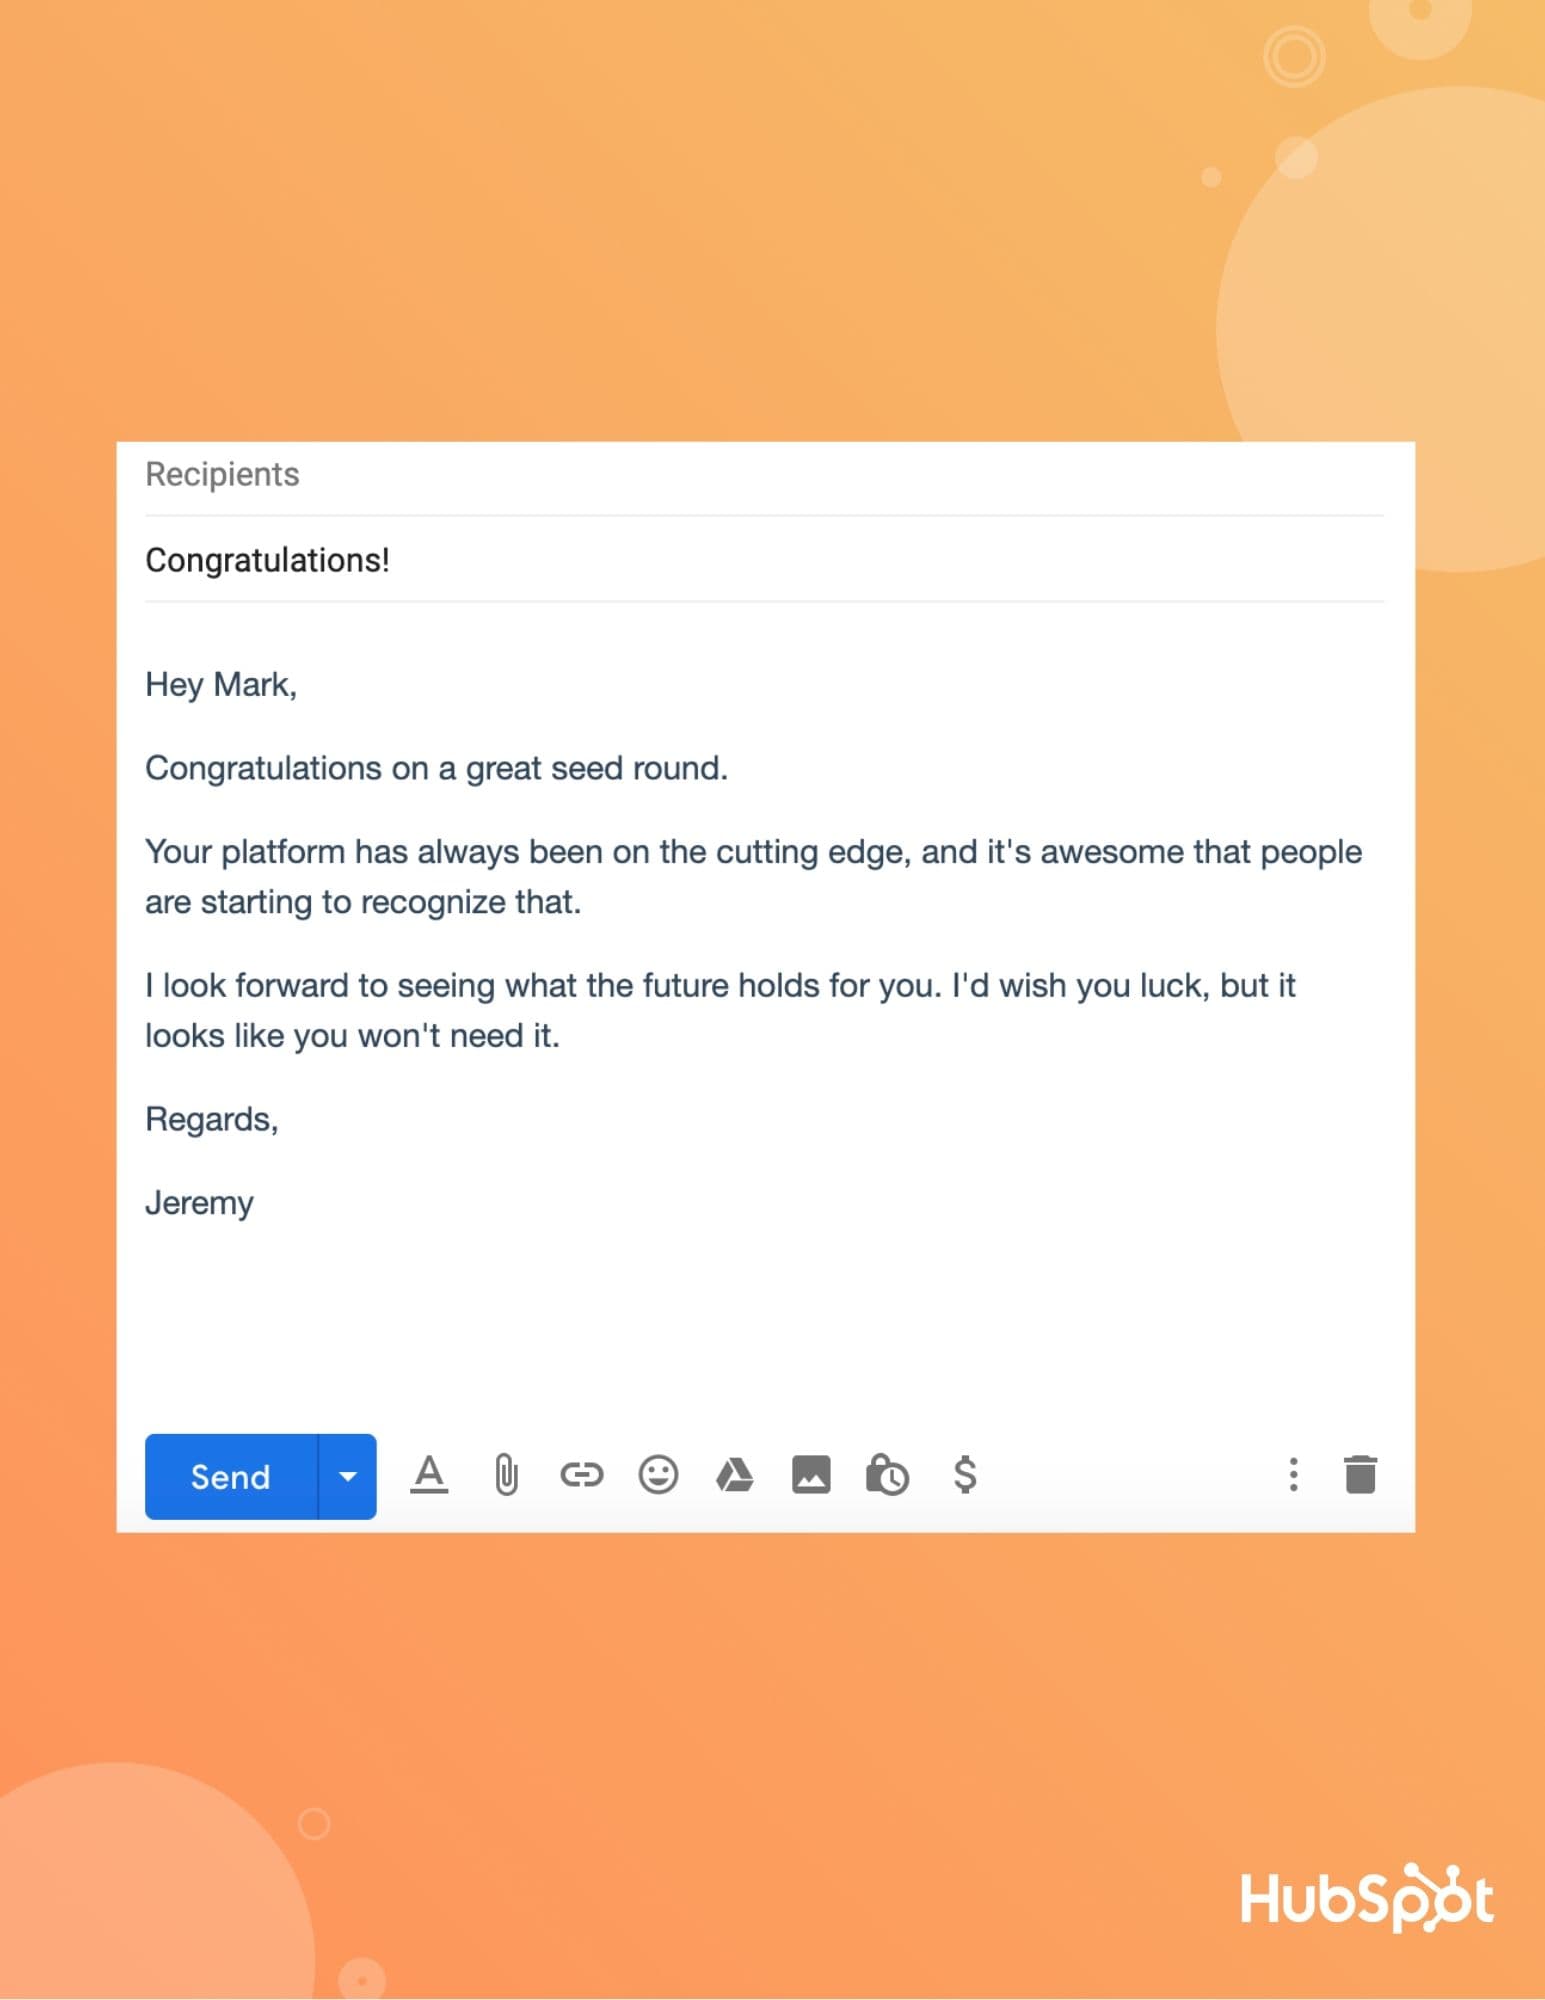 25 Sales Prospecting Email Templates Guaranteed to Start a